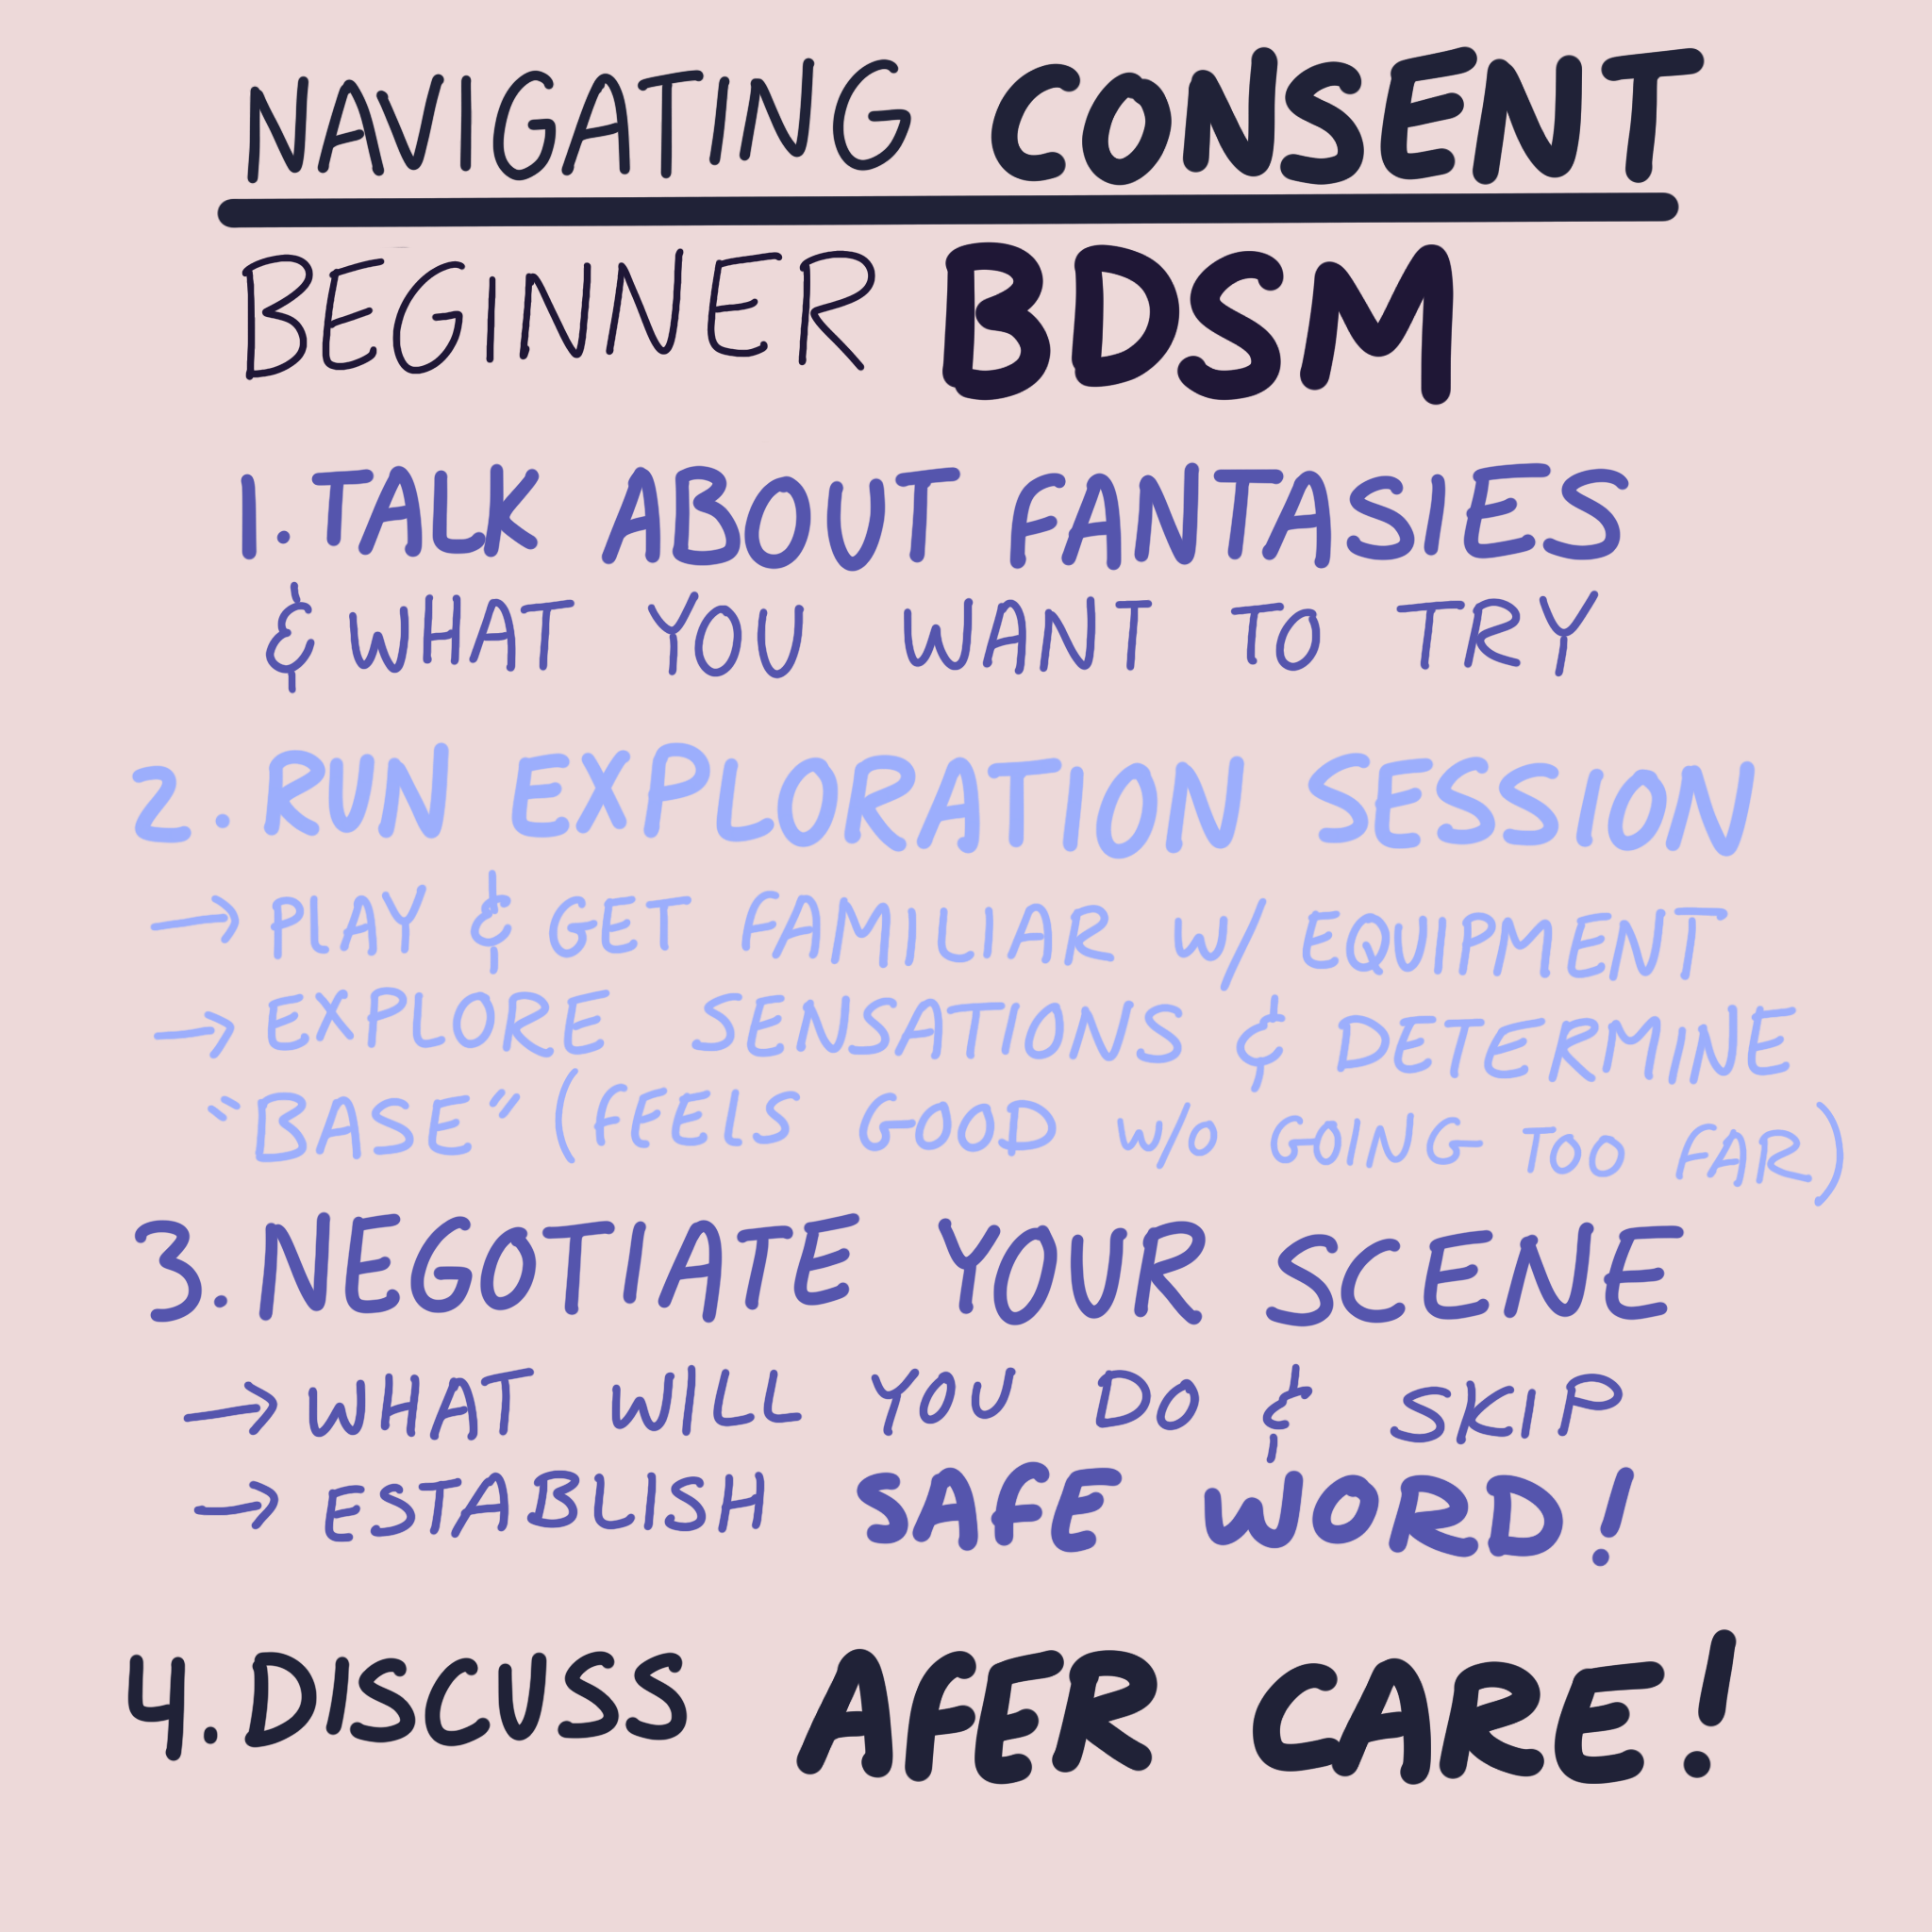 BDSM: Definition, Types, Safe Play, and How to Get Started